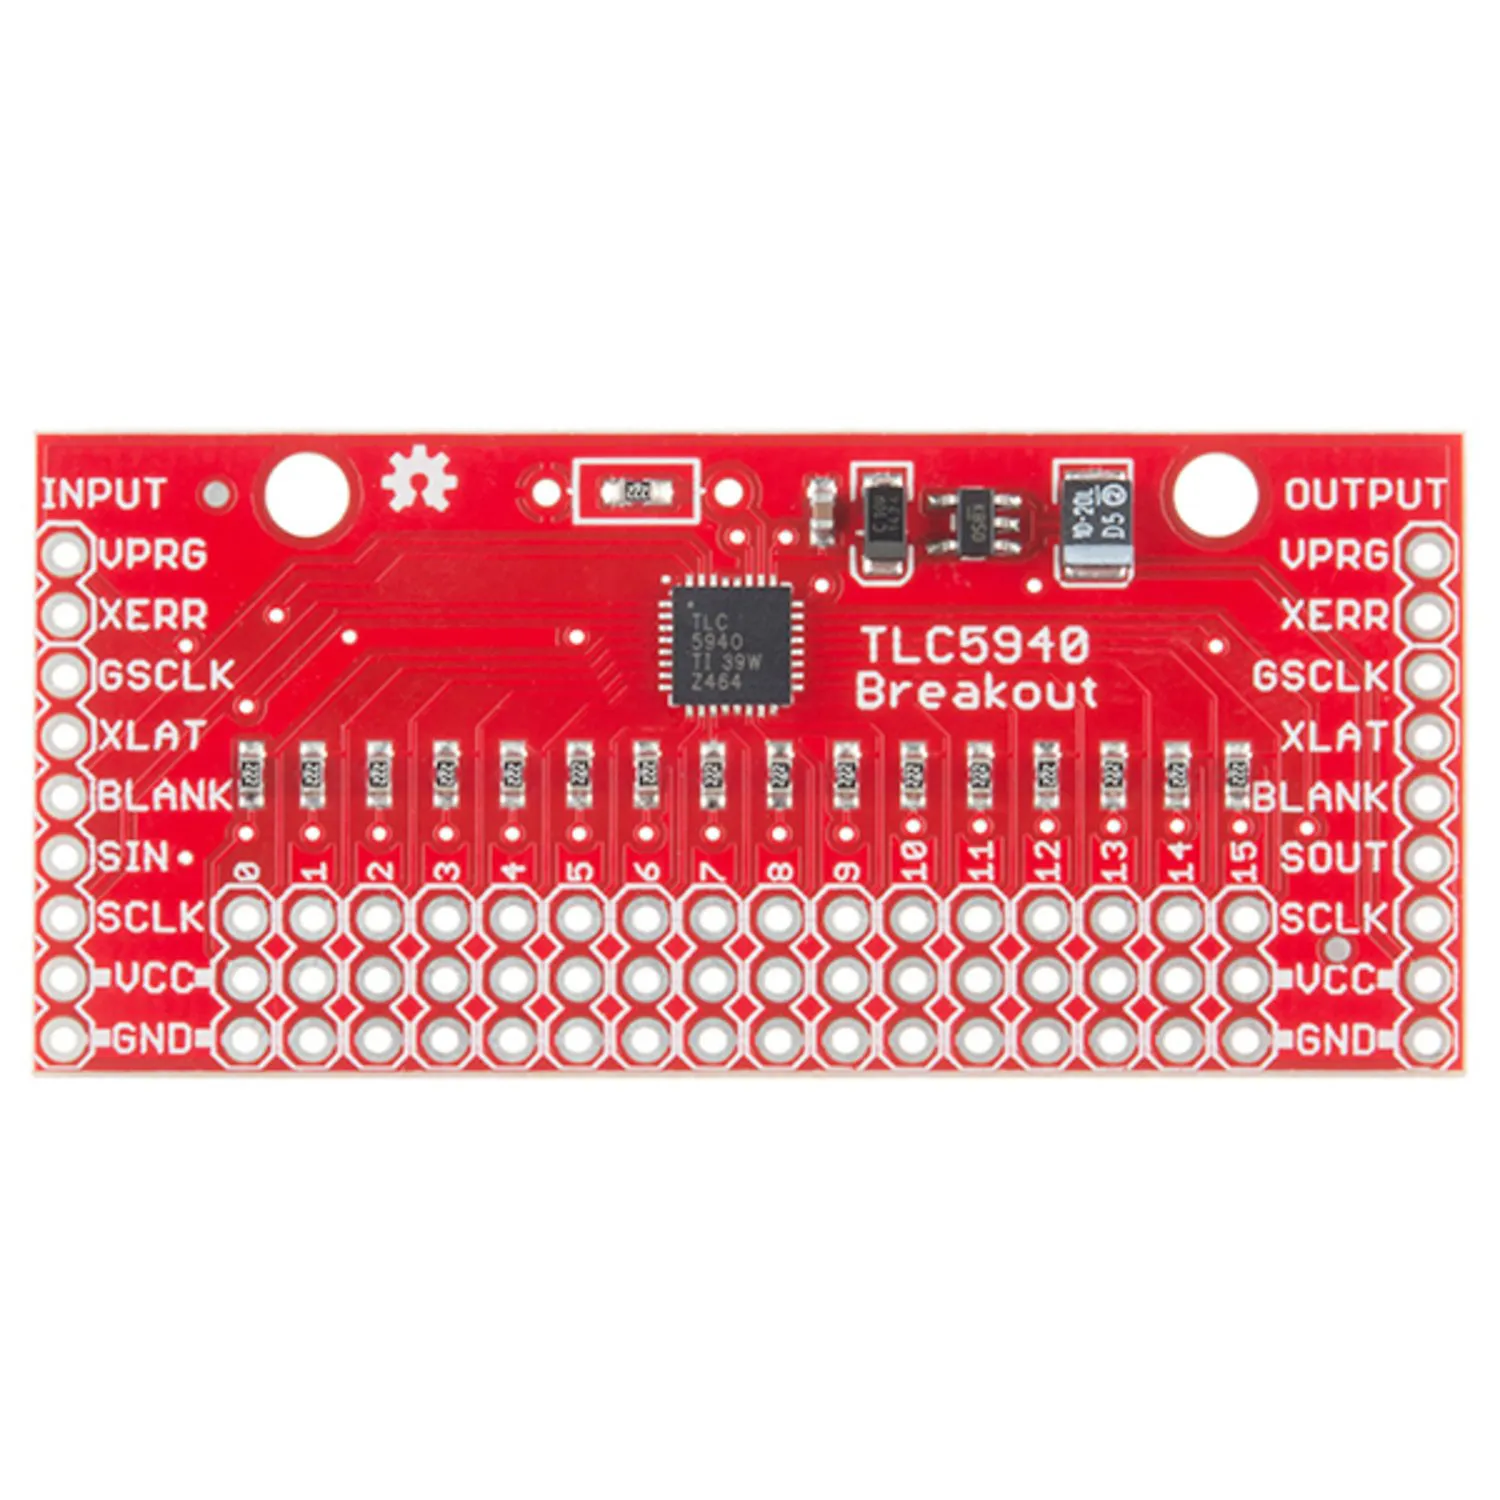 Photo of SparkFun LED Driver Breakout - TLC5940 (16 Channel)